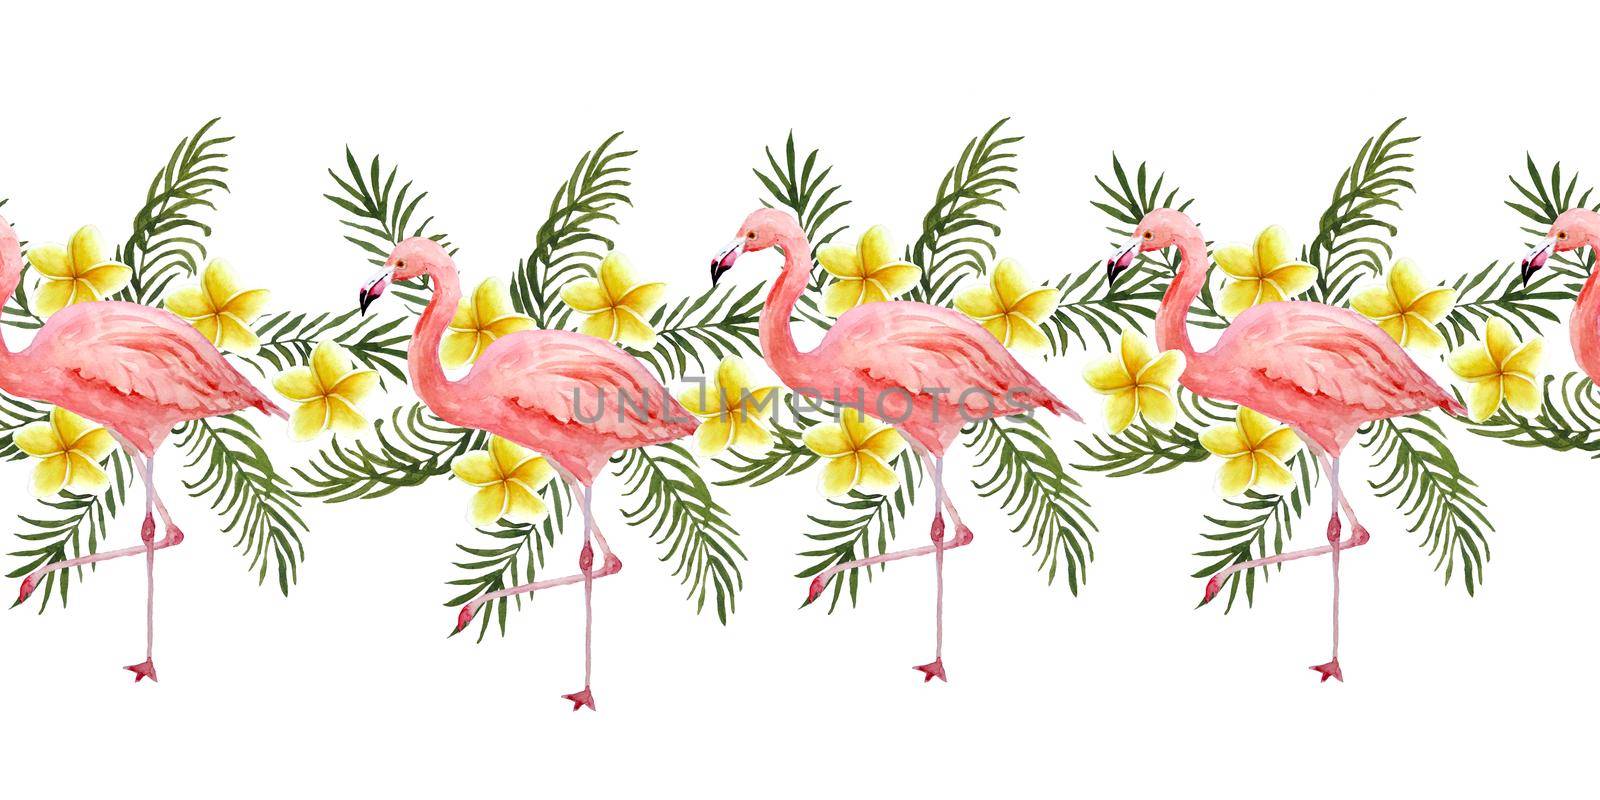 Watercolor hand drawn seamless horizontal border with pink flamingo bird and tropical green palm leaves plumeria frangipani flowers on background. Summer vacation holiday concept, card invitation. by Lagmar